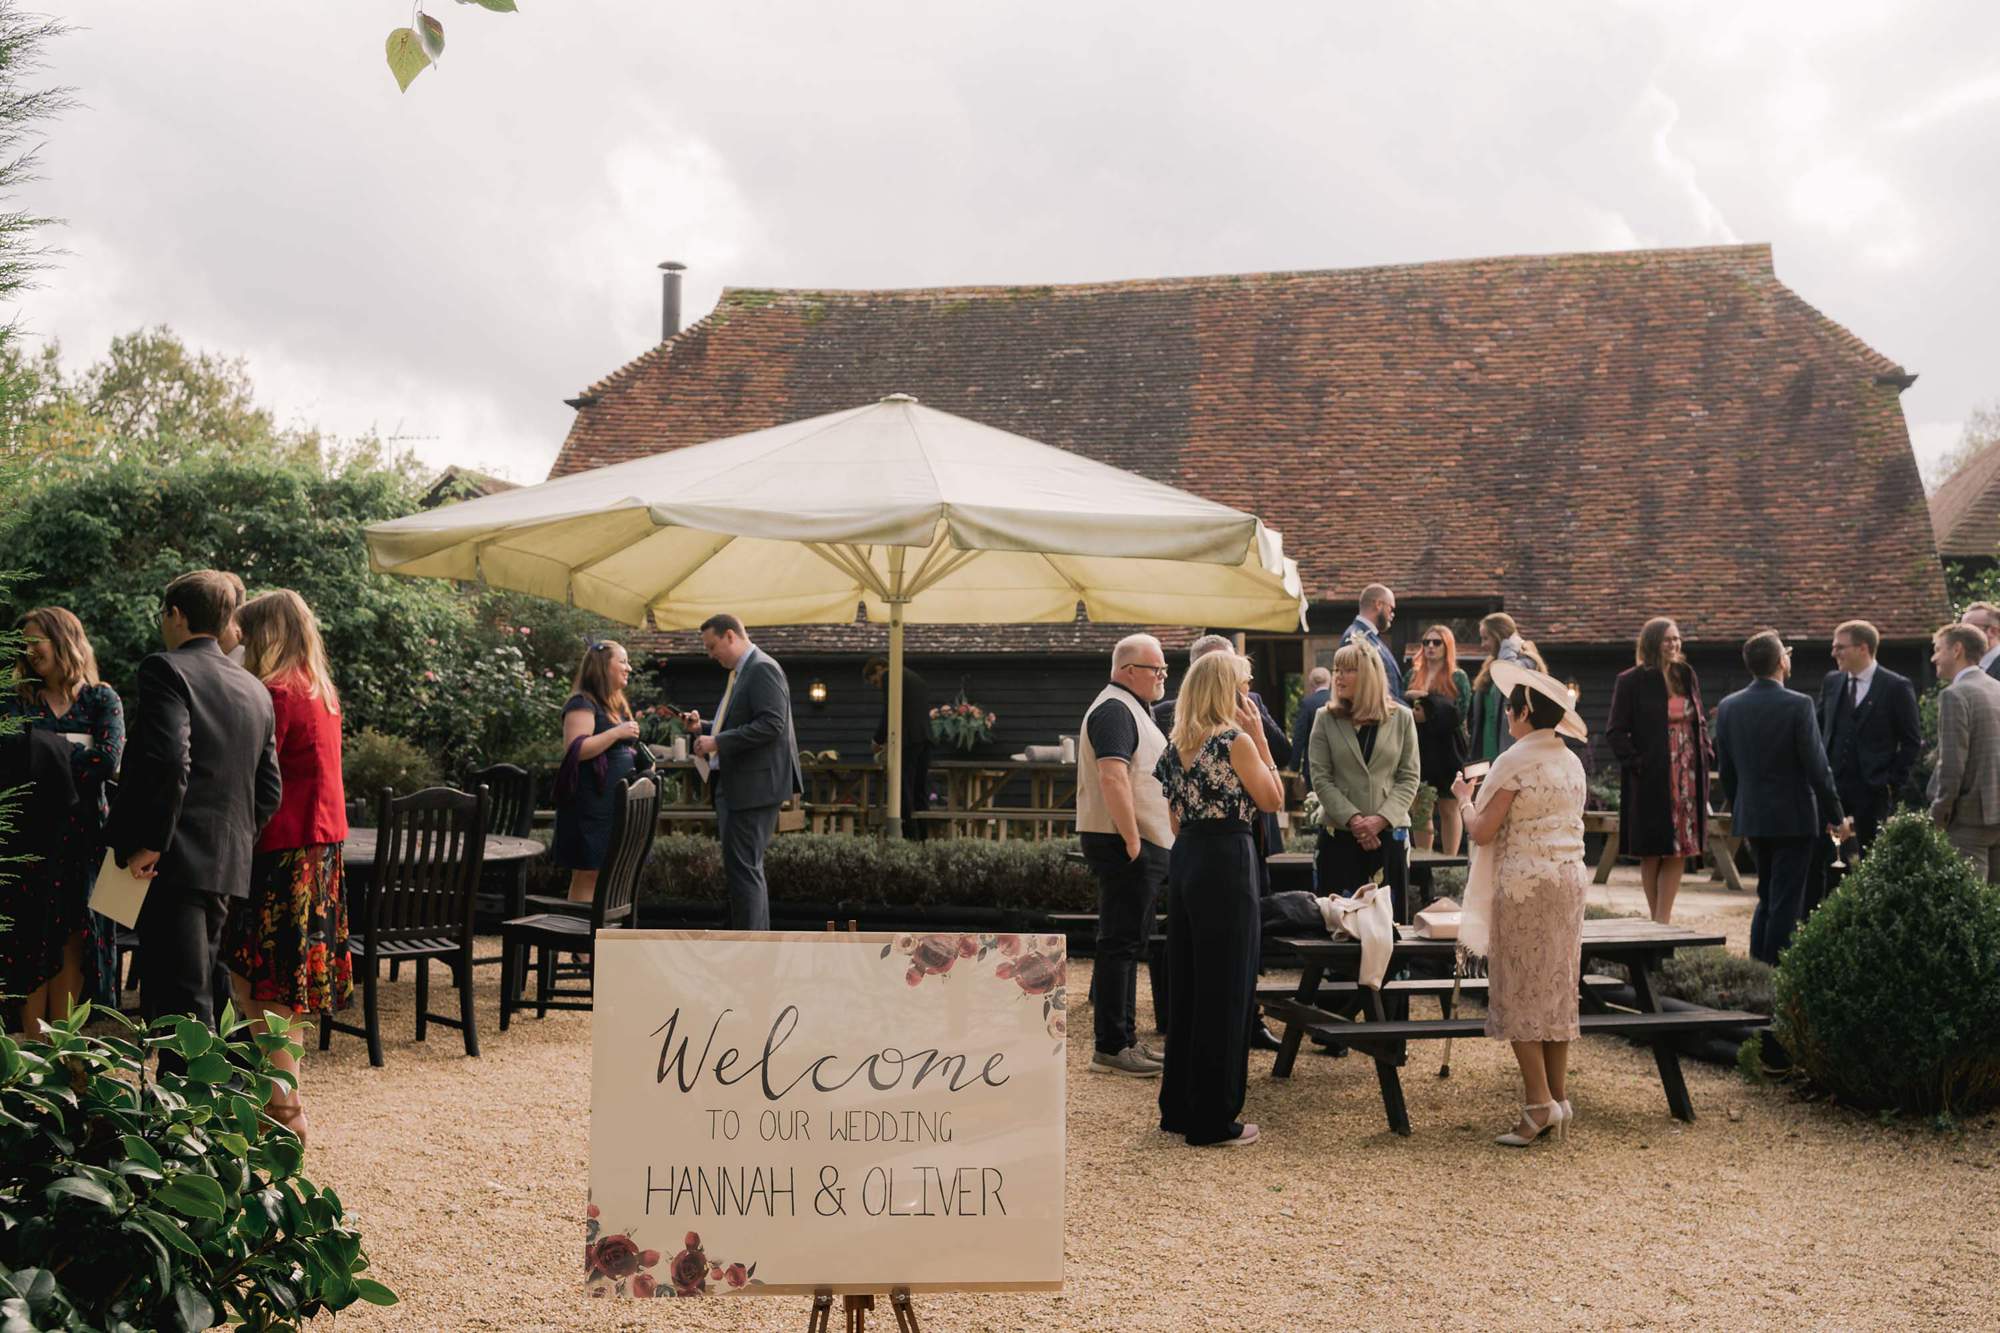 Wedding reception with guets mingling at Rumbolds Farms wedding venue in Billingshurst, Sussex.